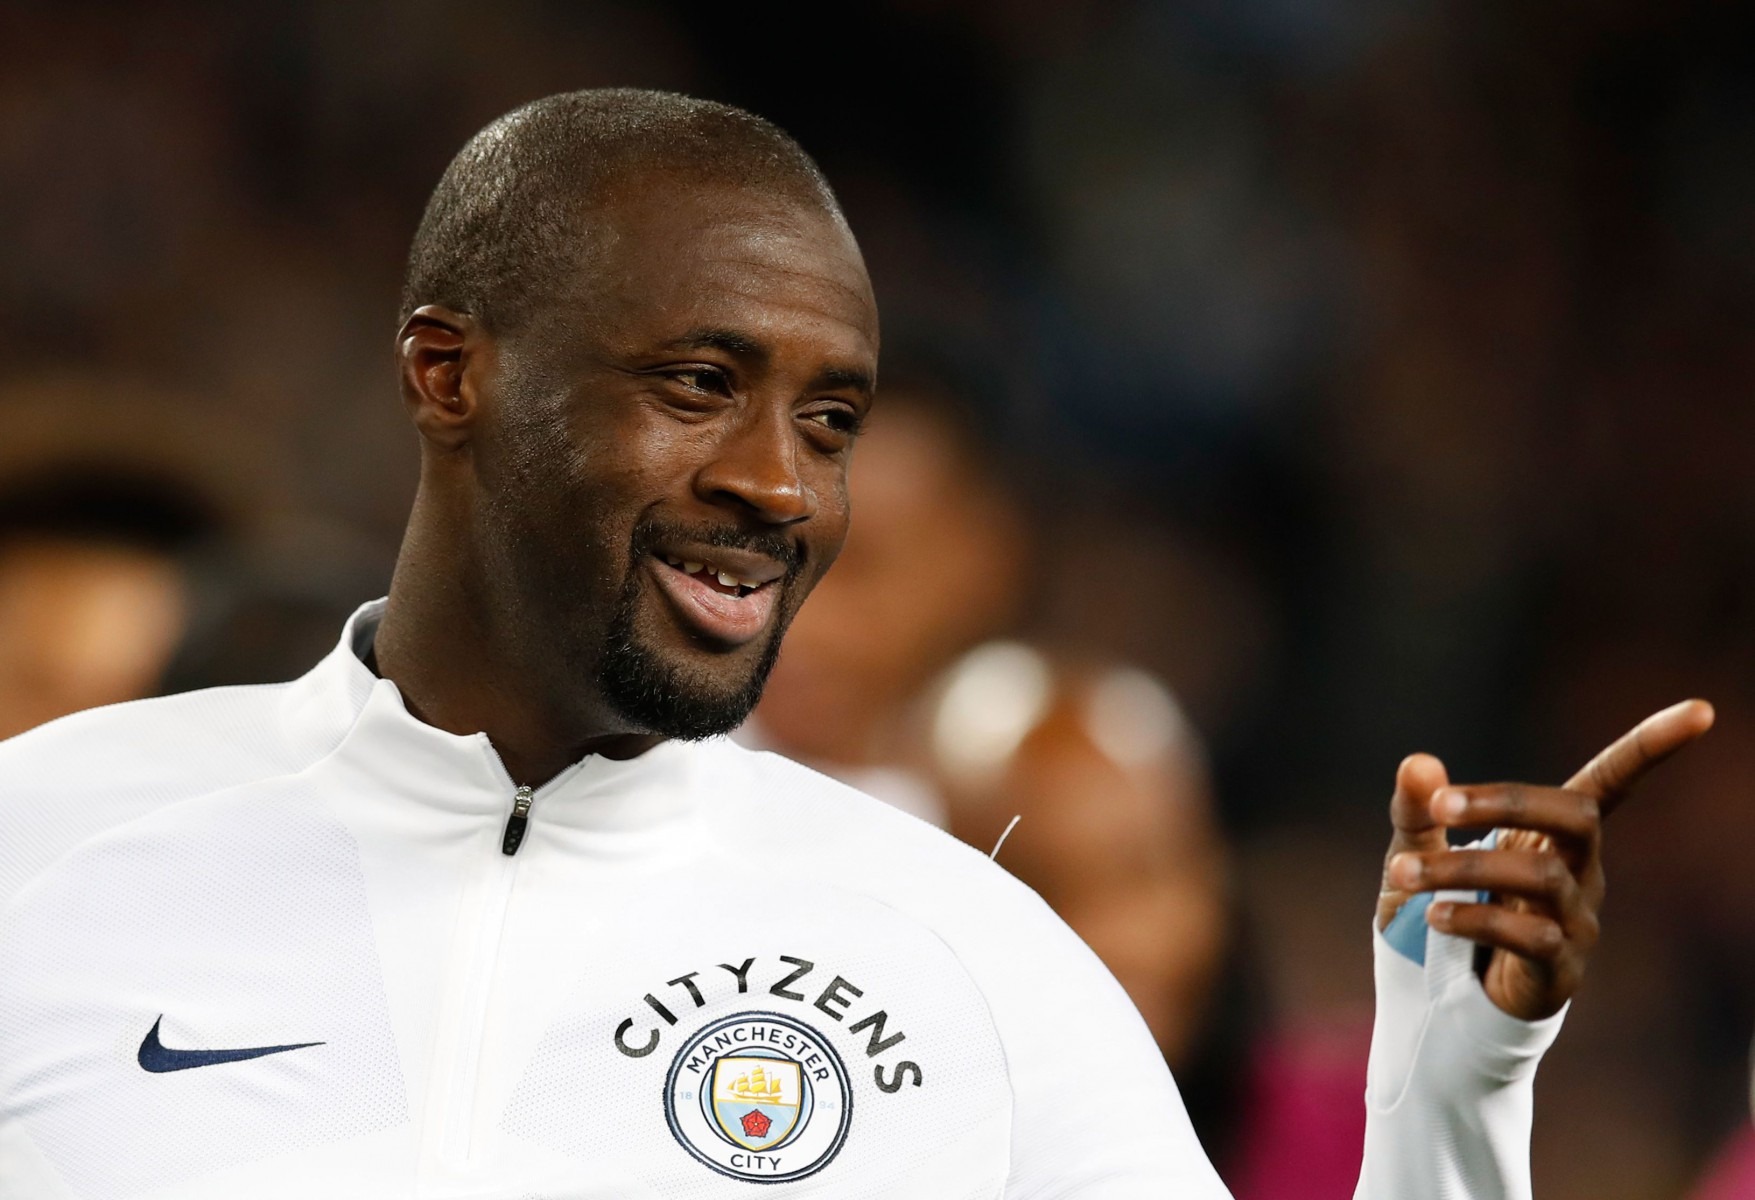 , Man City legend Yaya Toure promoted from second division to Chinese Super League with Qingdao Huanghai